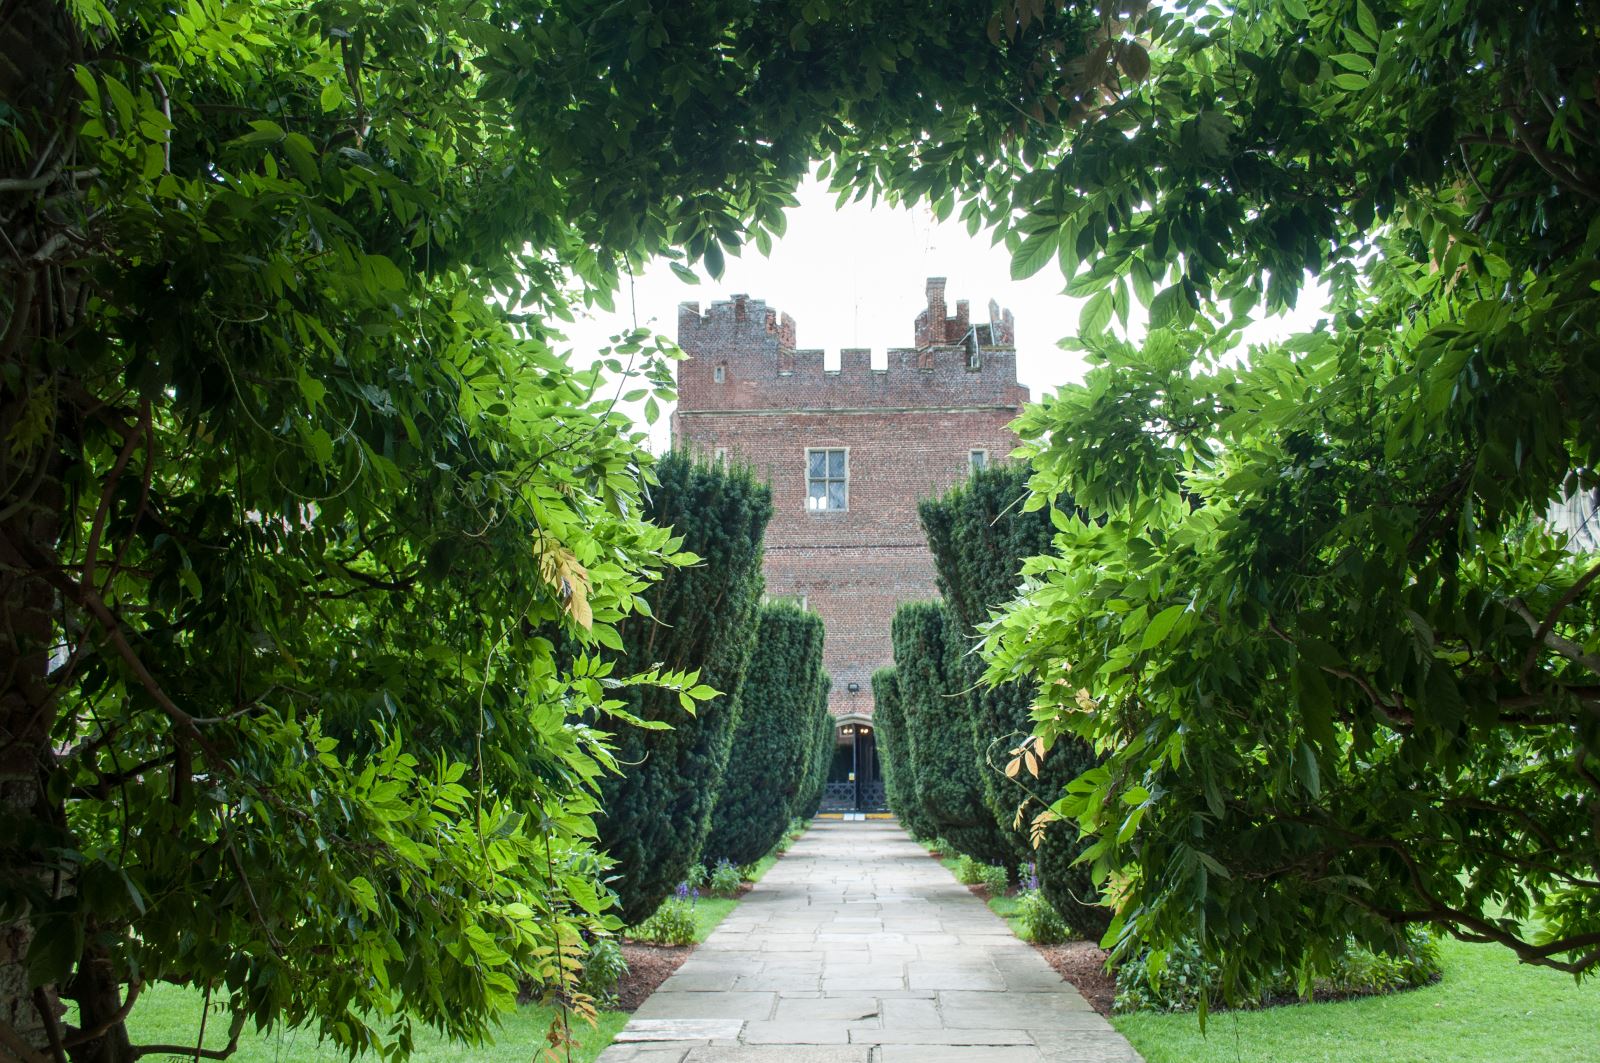 The gardens of Herstmonceux Castle by Suzanne Jones of Sussex Bloggers